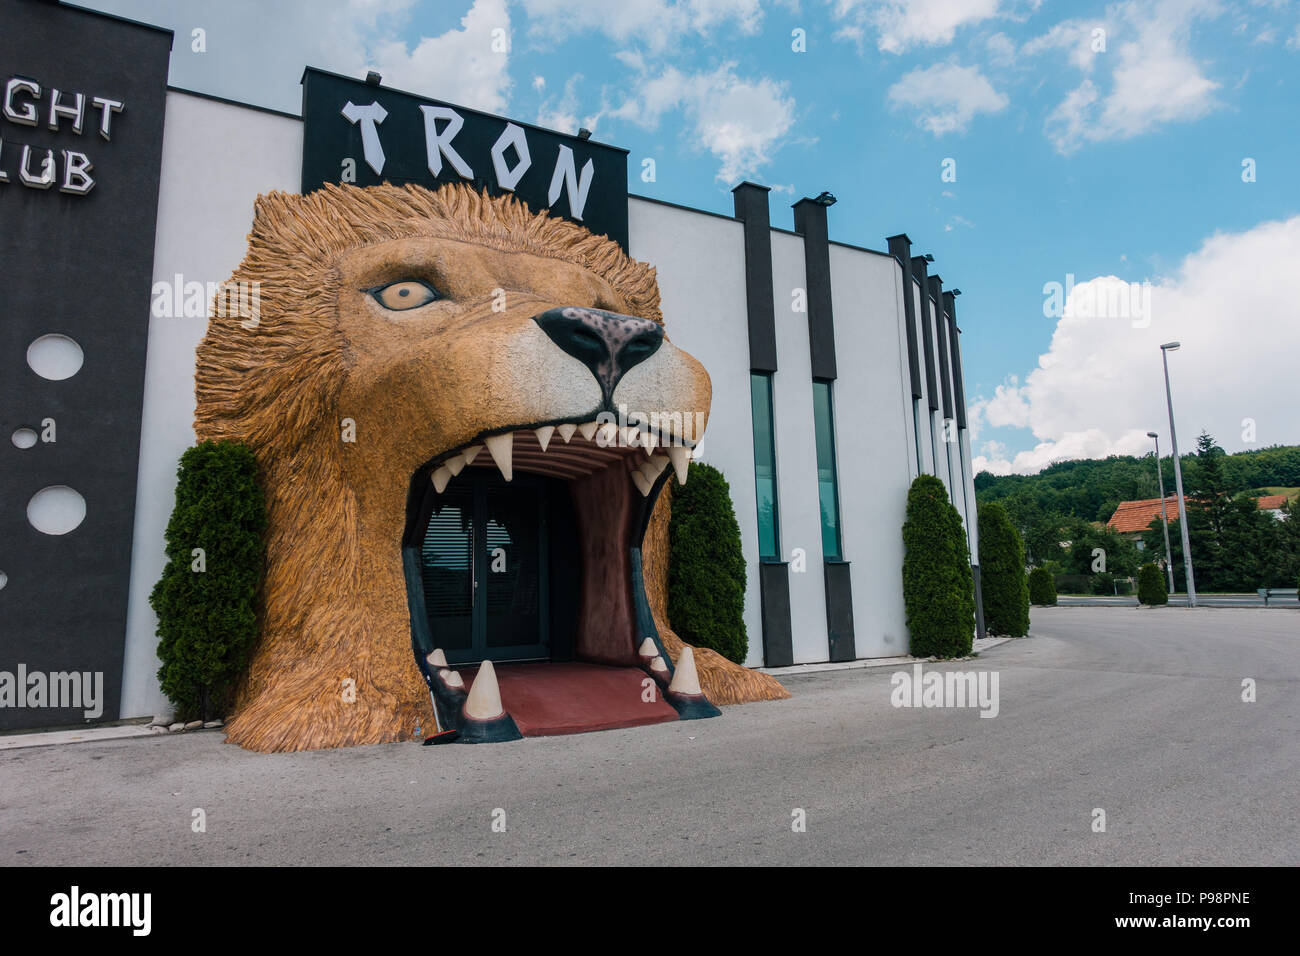 A giant lion head serves as the entrance to Tron night club on the outskirts of Travnik, Bosnia and Herzegovina Stock Photo